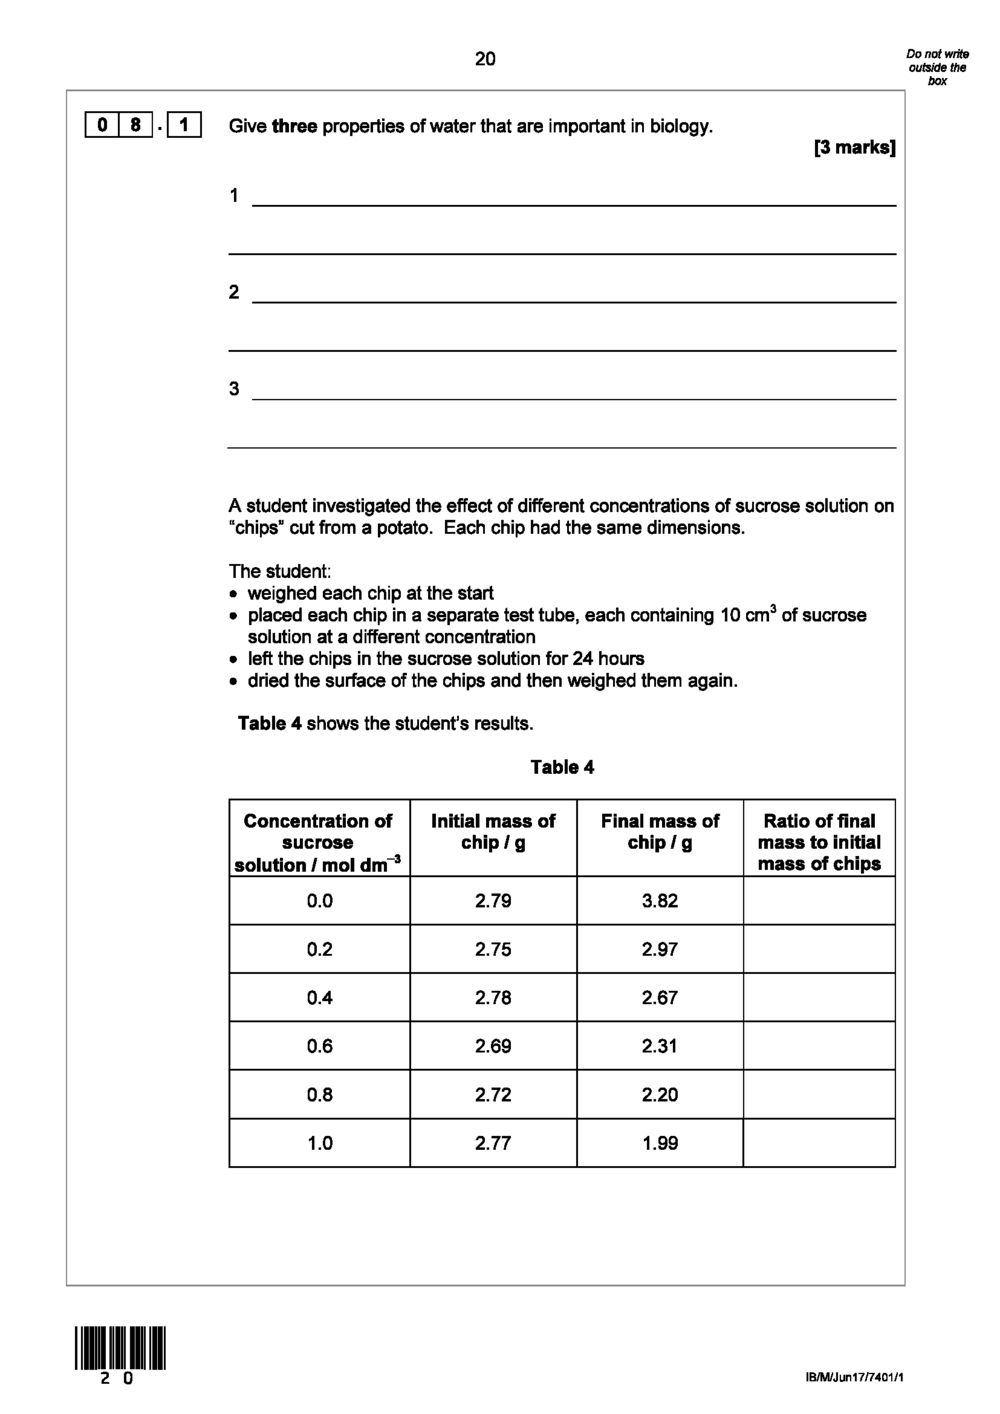 calculationquestionsAQA_Page_14.png